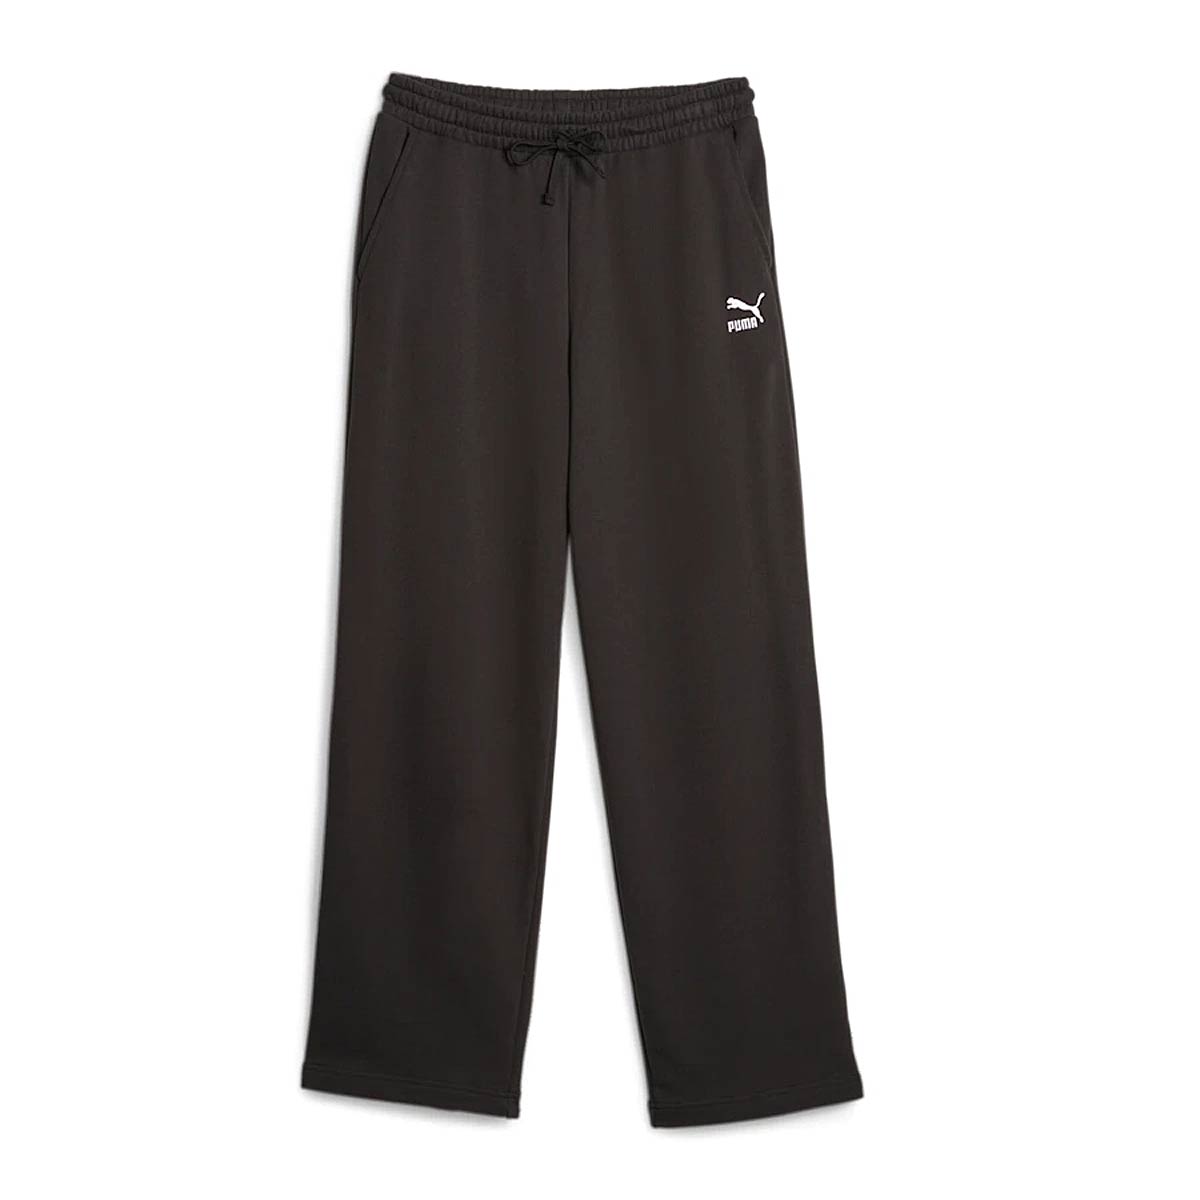 Buy BETTER CLASSICS Relaxed Sweatpants TR for N/A 0.0 on KICKZ.com!